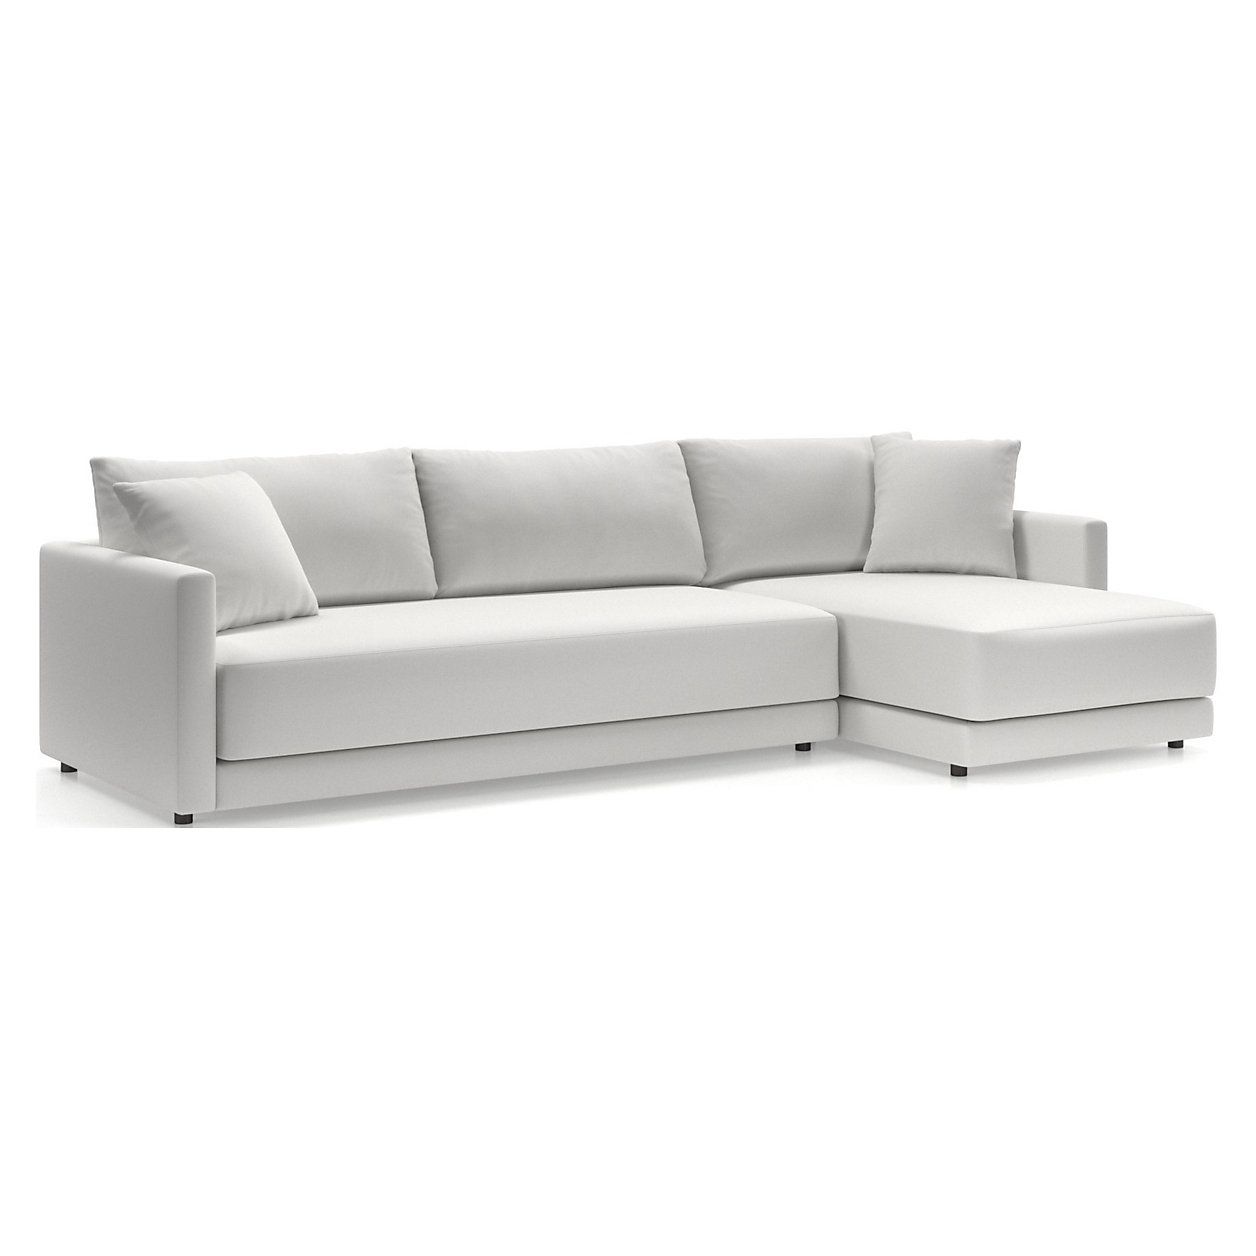 Gather Deep 2-Piece Right-Arm Wide Chaise Sectional Sofa + Reviews | Crate & Barrel | Crate & Barrel